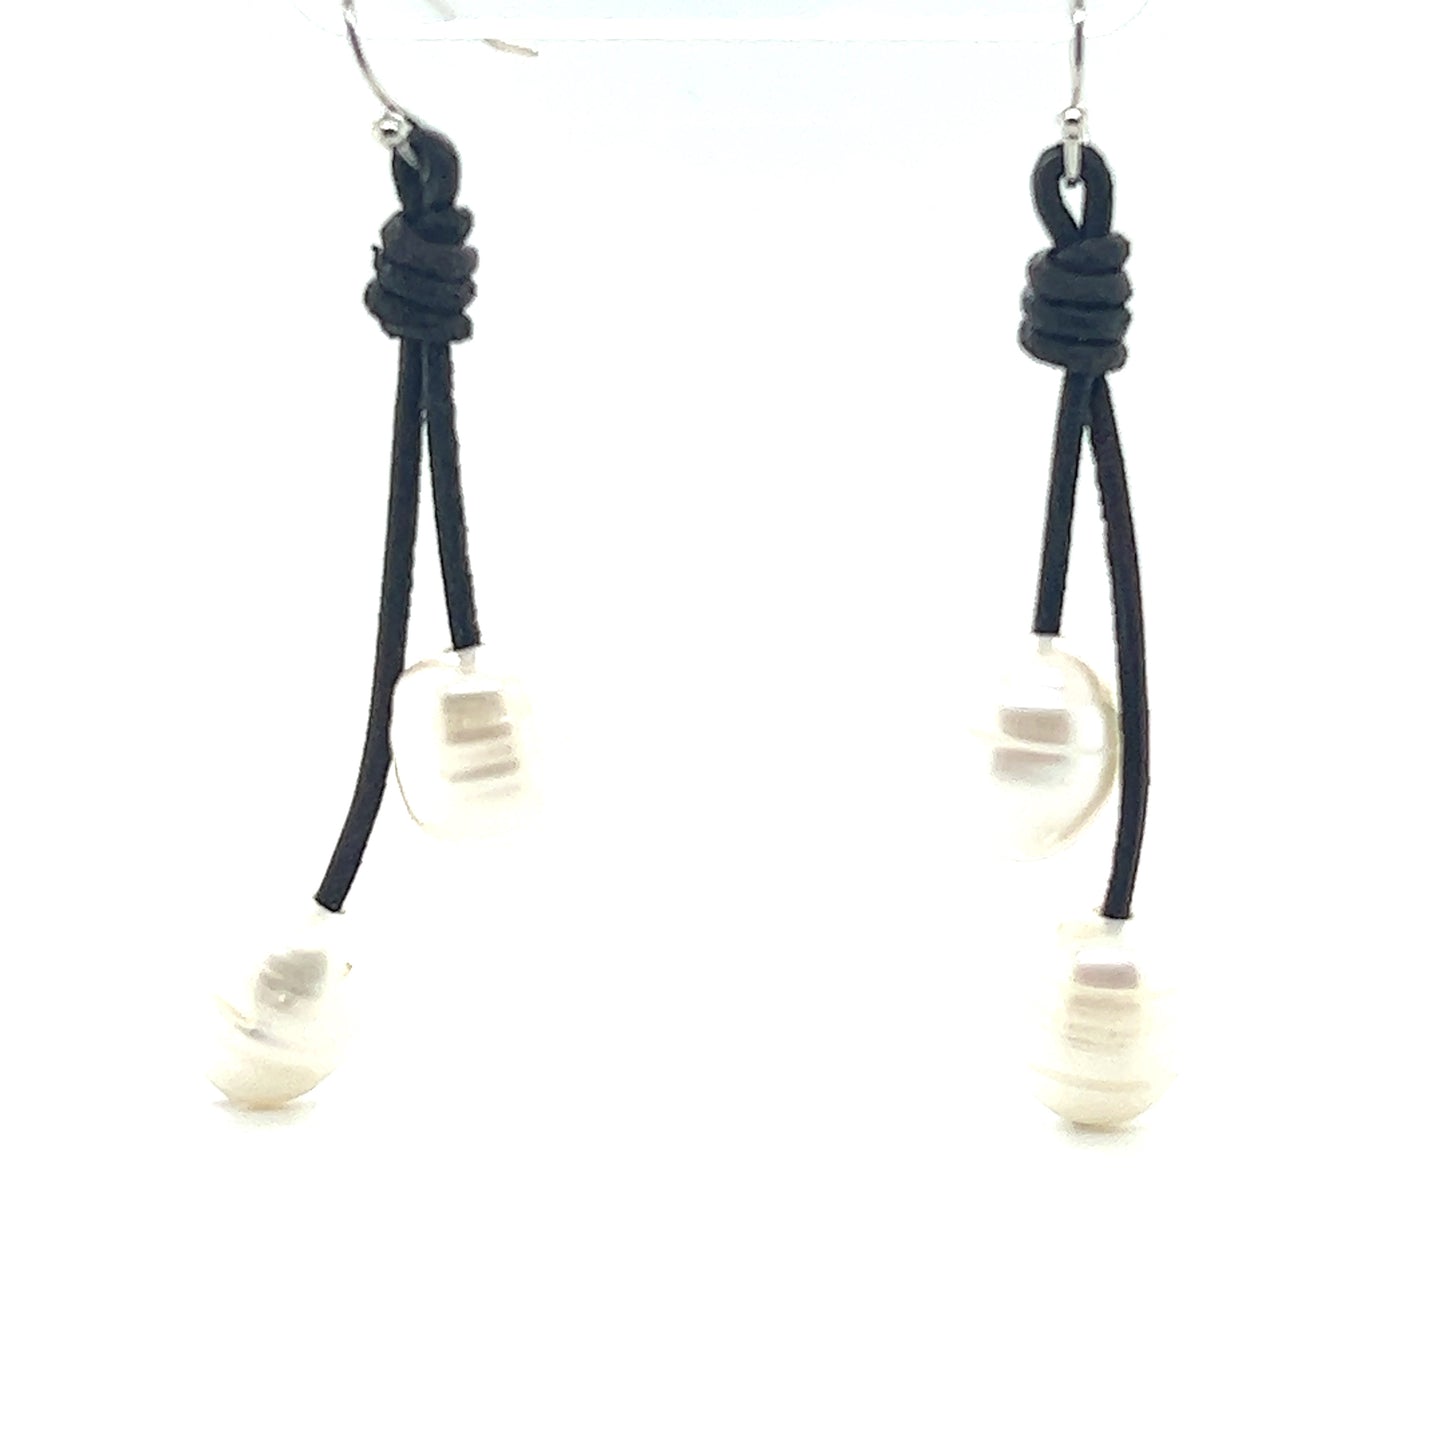 A pair of Super Silver black and white Leather Cord and Pearl Earrings with a laid-back style and leather loop.